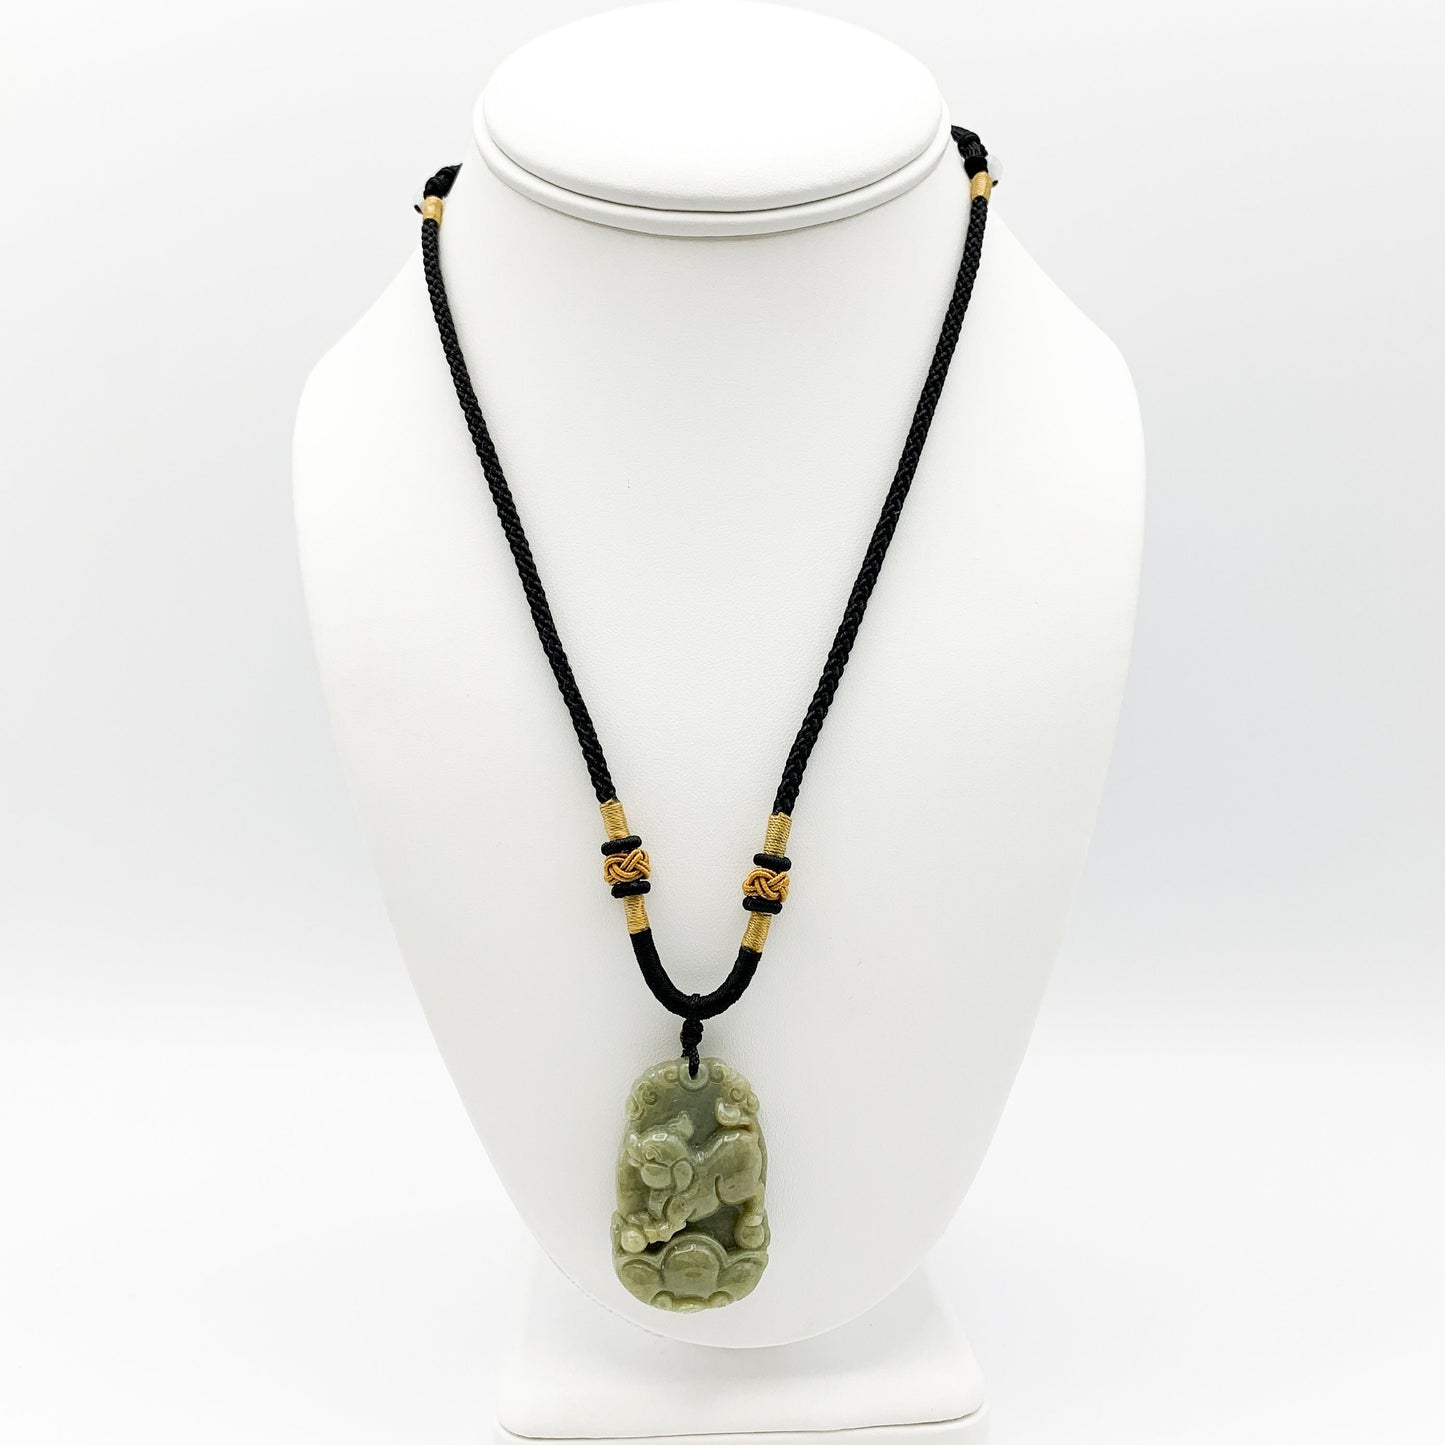 Jadeite Jade Pig Boar Chinese Zodiac Carved Rustic Pendant Necklace, YW-0110-1646605343 - AriaDesignCollection